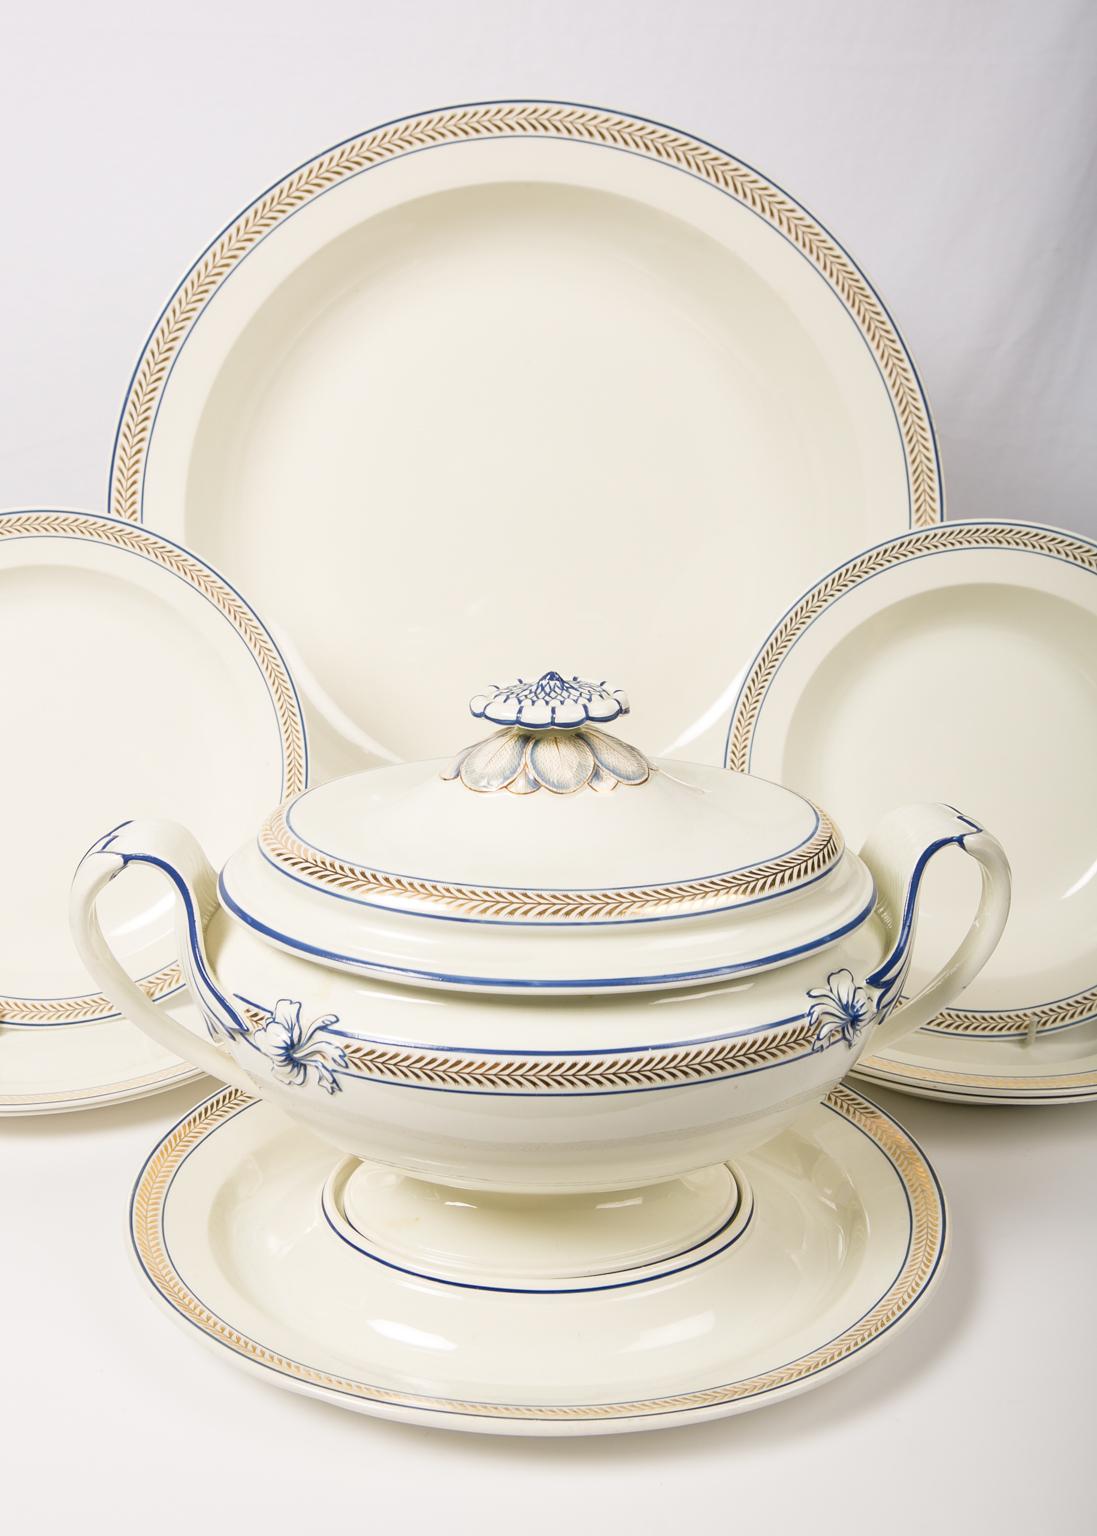 English Wedgwood Antique Creamware Dinner Service with 57 Pieces England ca. 1820